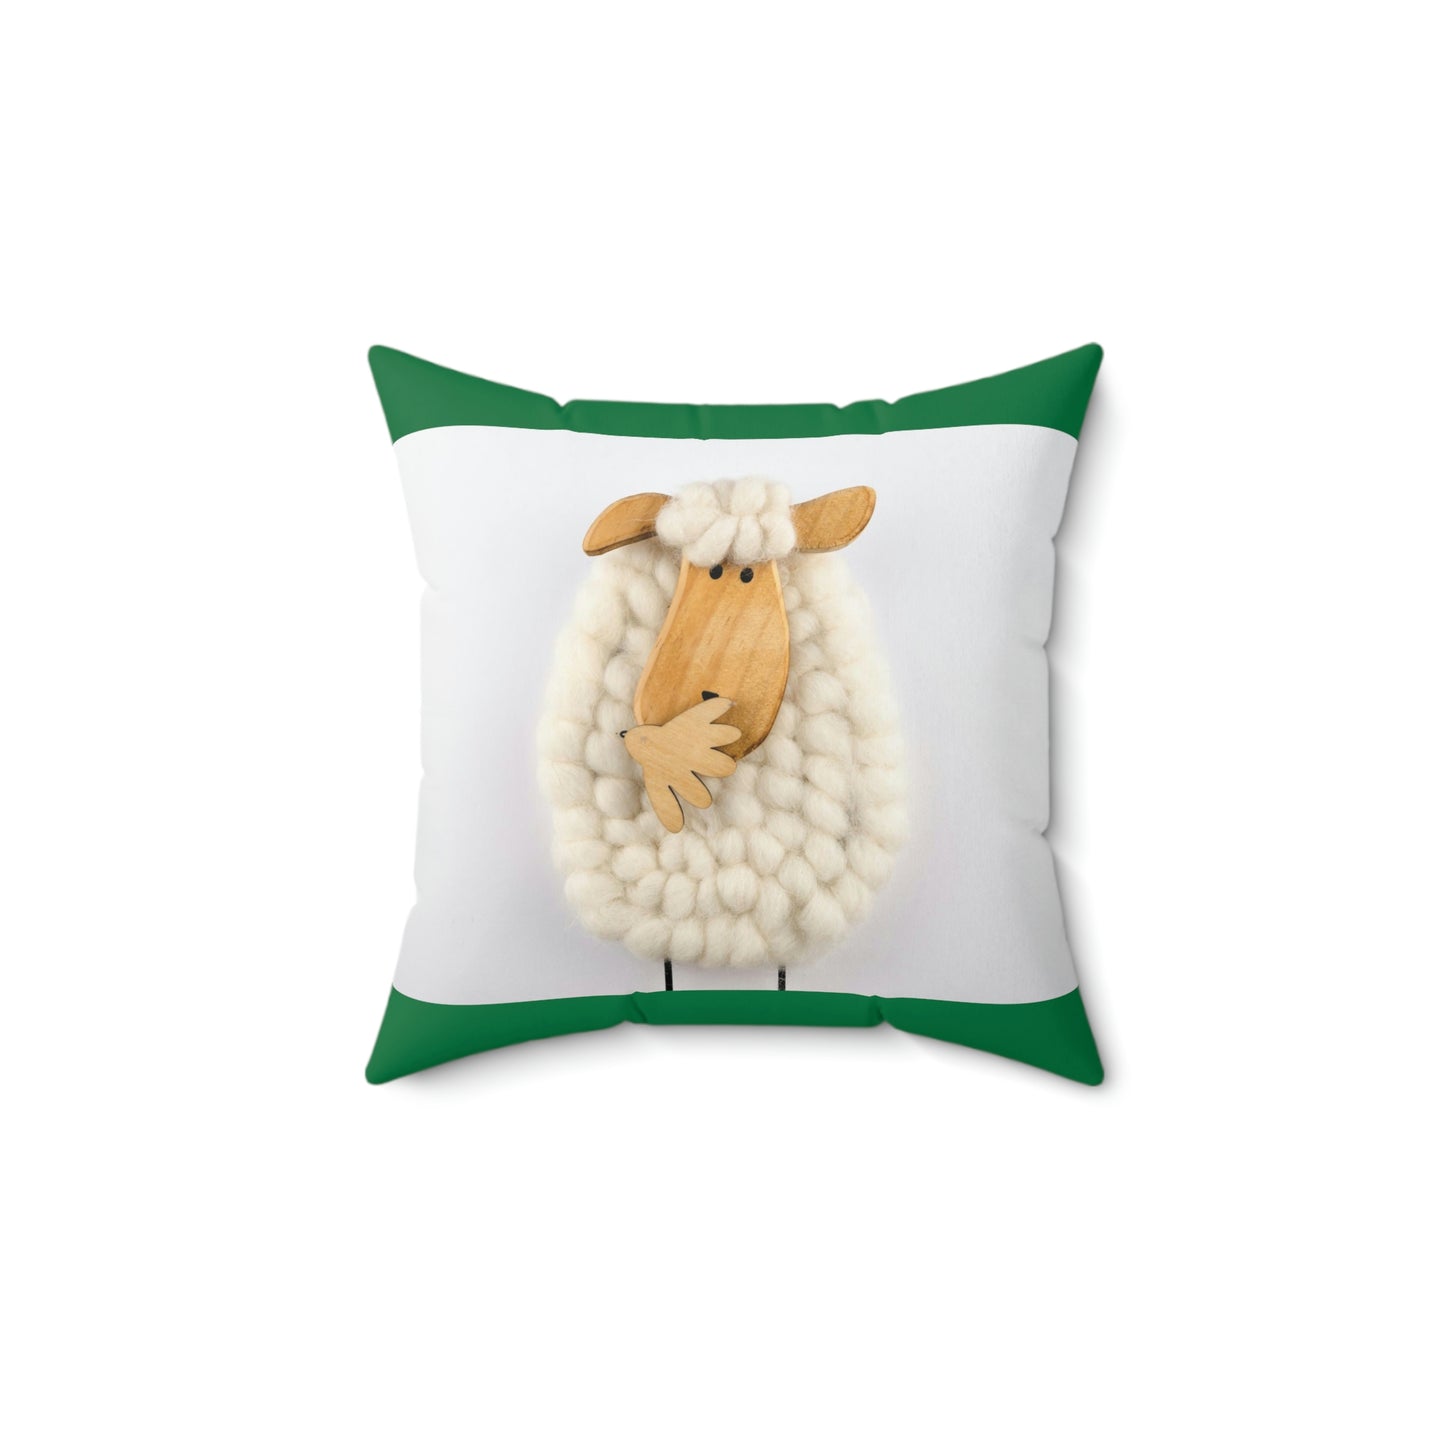 Sheep Pillow Case - Dark Green and White Colors - Faux Suede Square Pillow Case